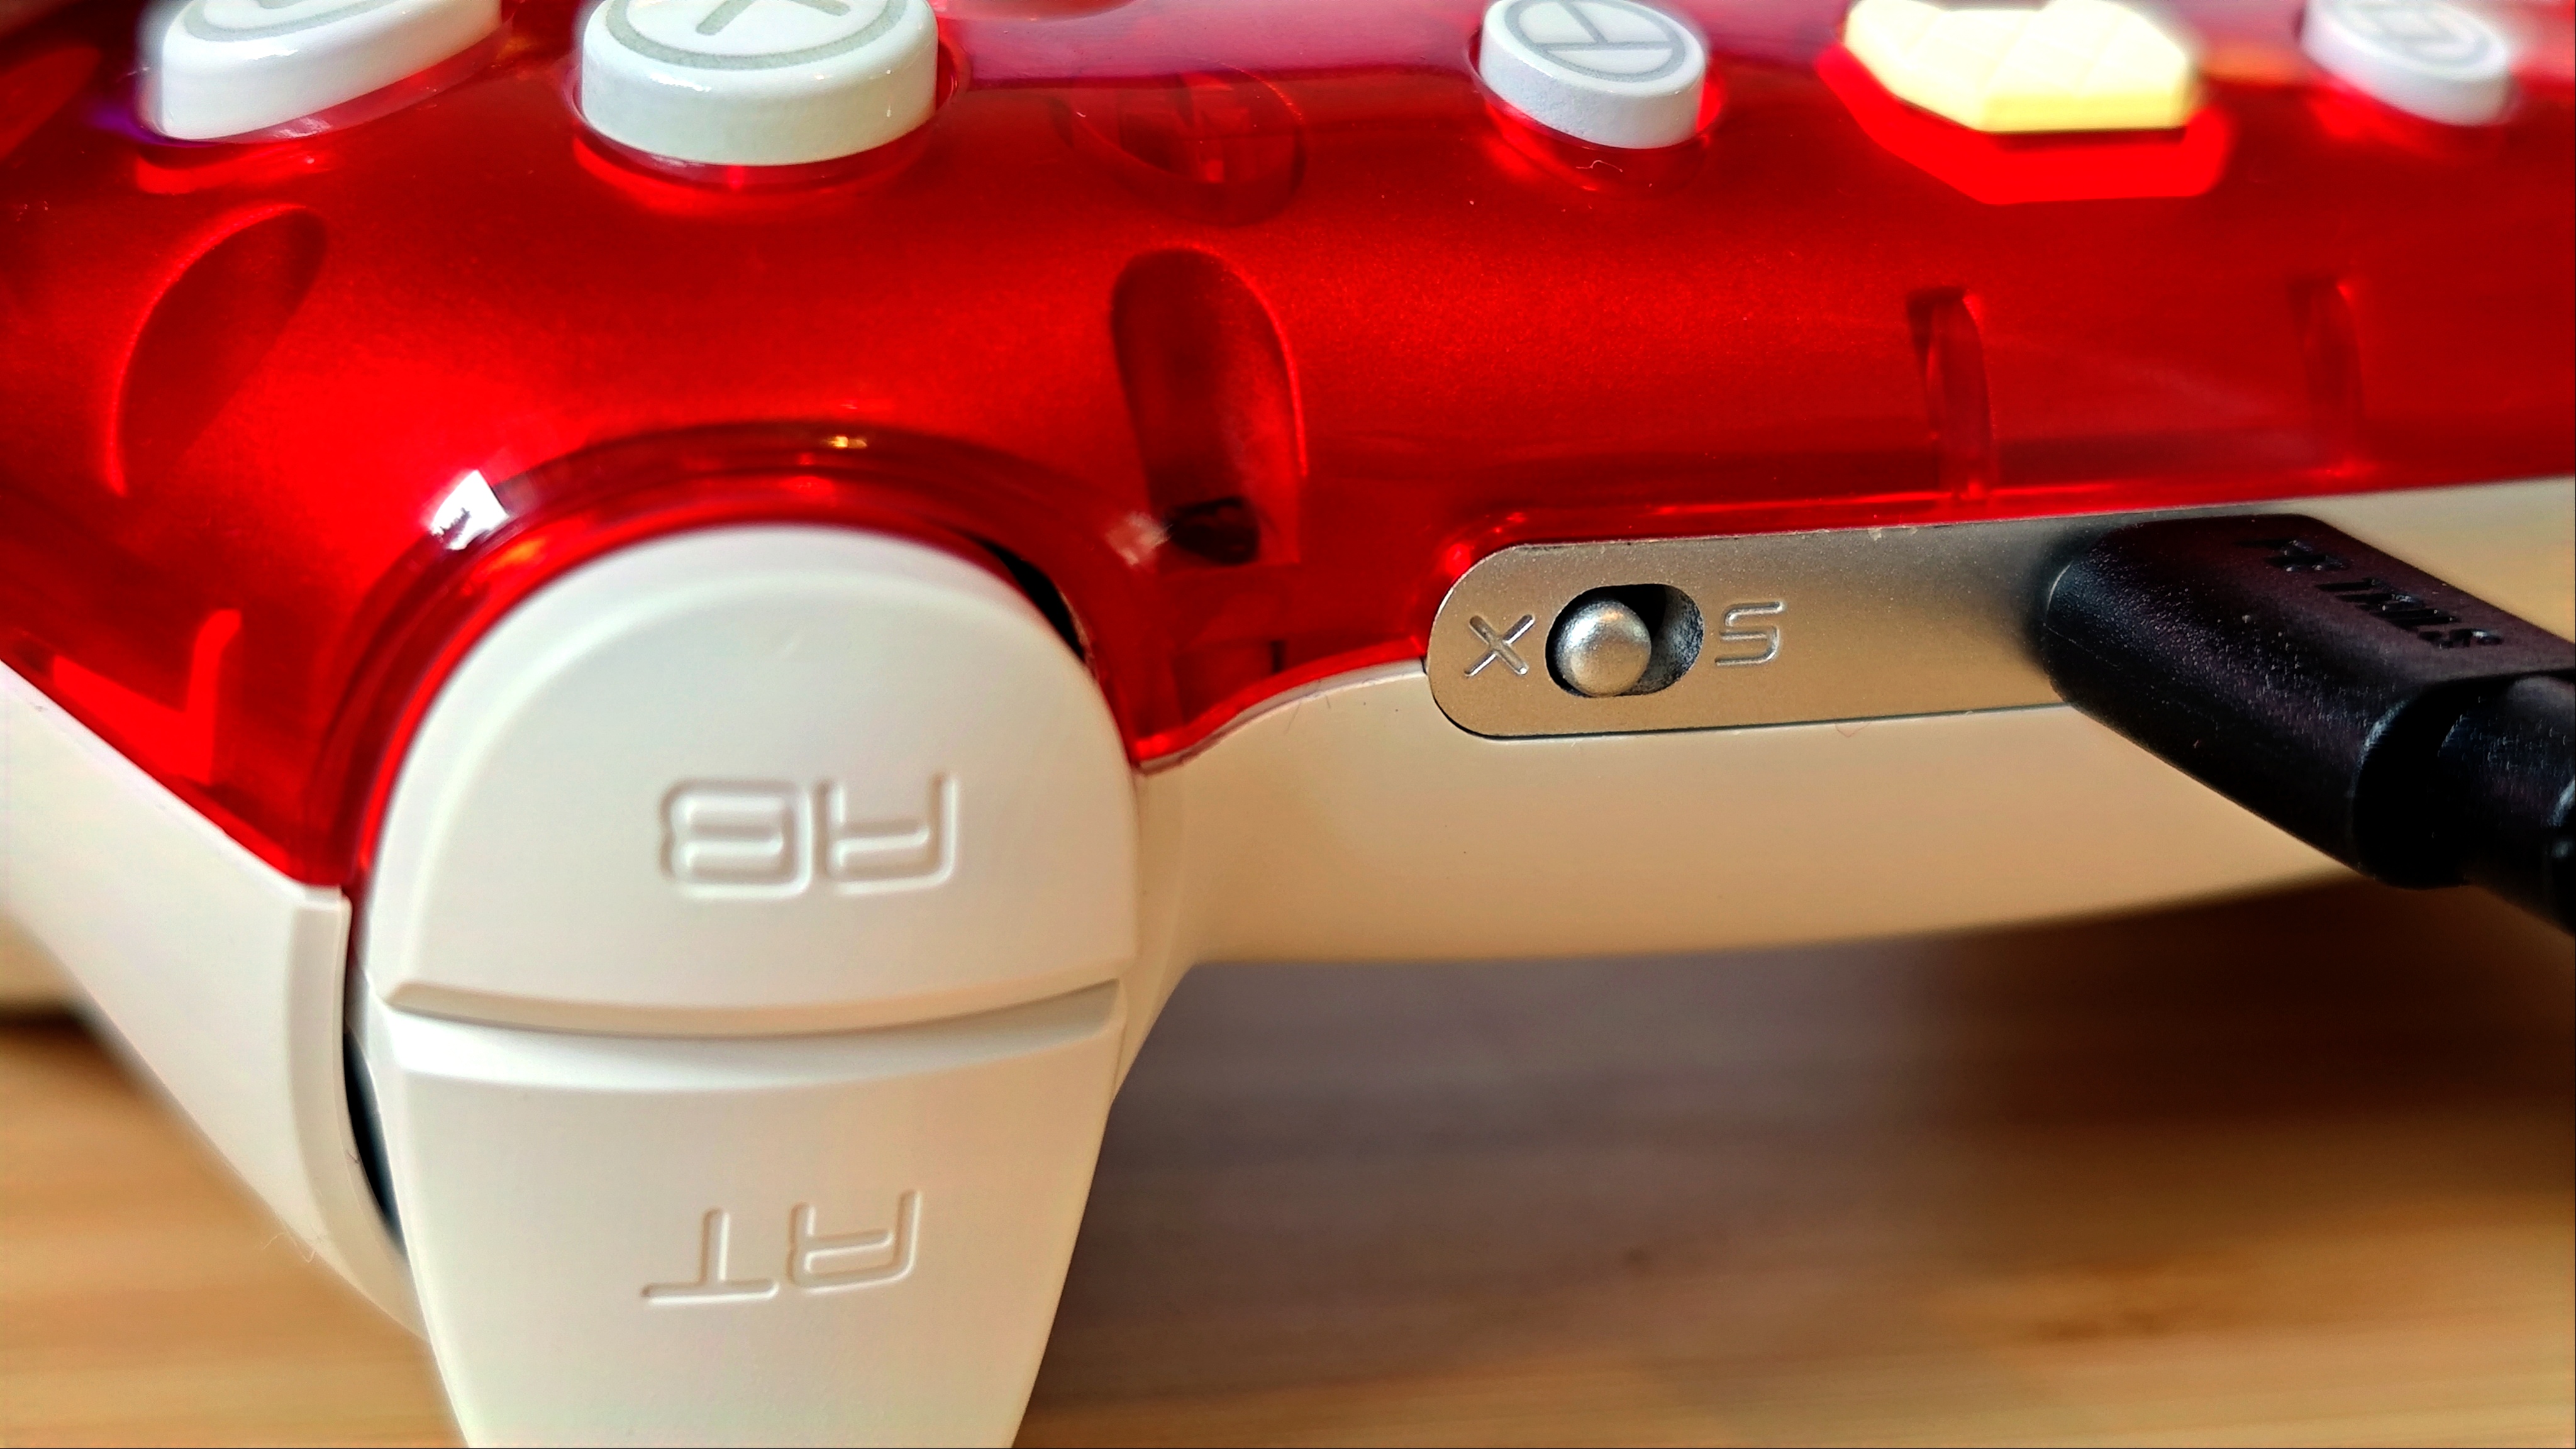 Front view of a Ruby red PB Tails Crush gaming controller sitting on a wooden desk